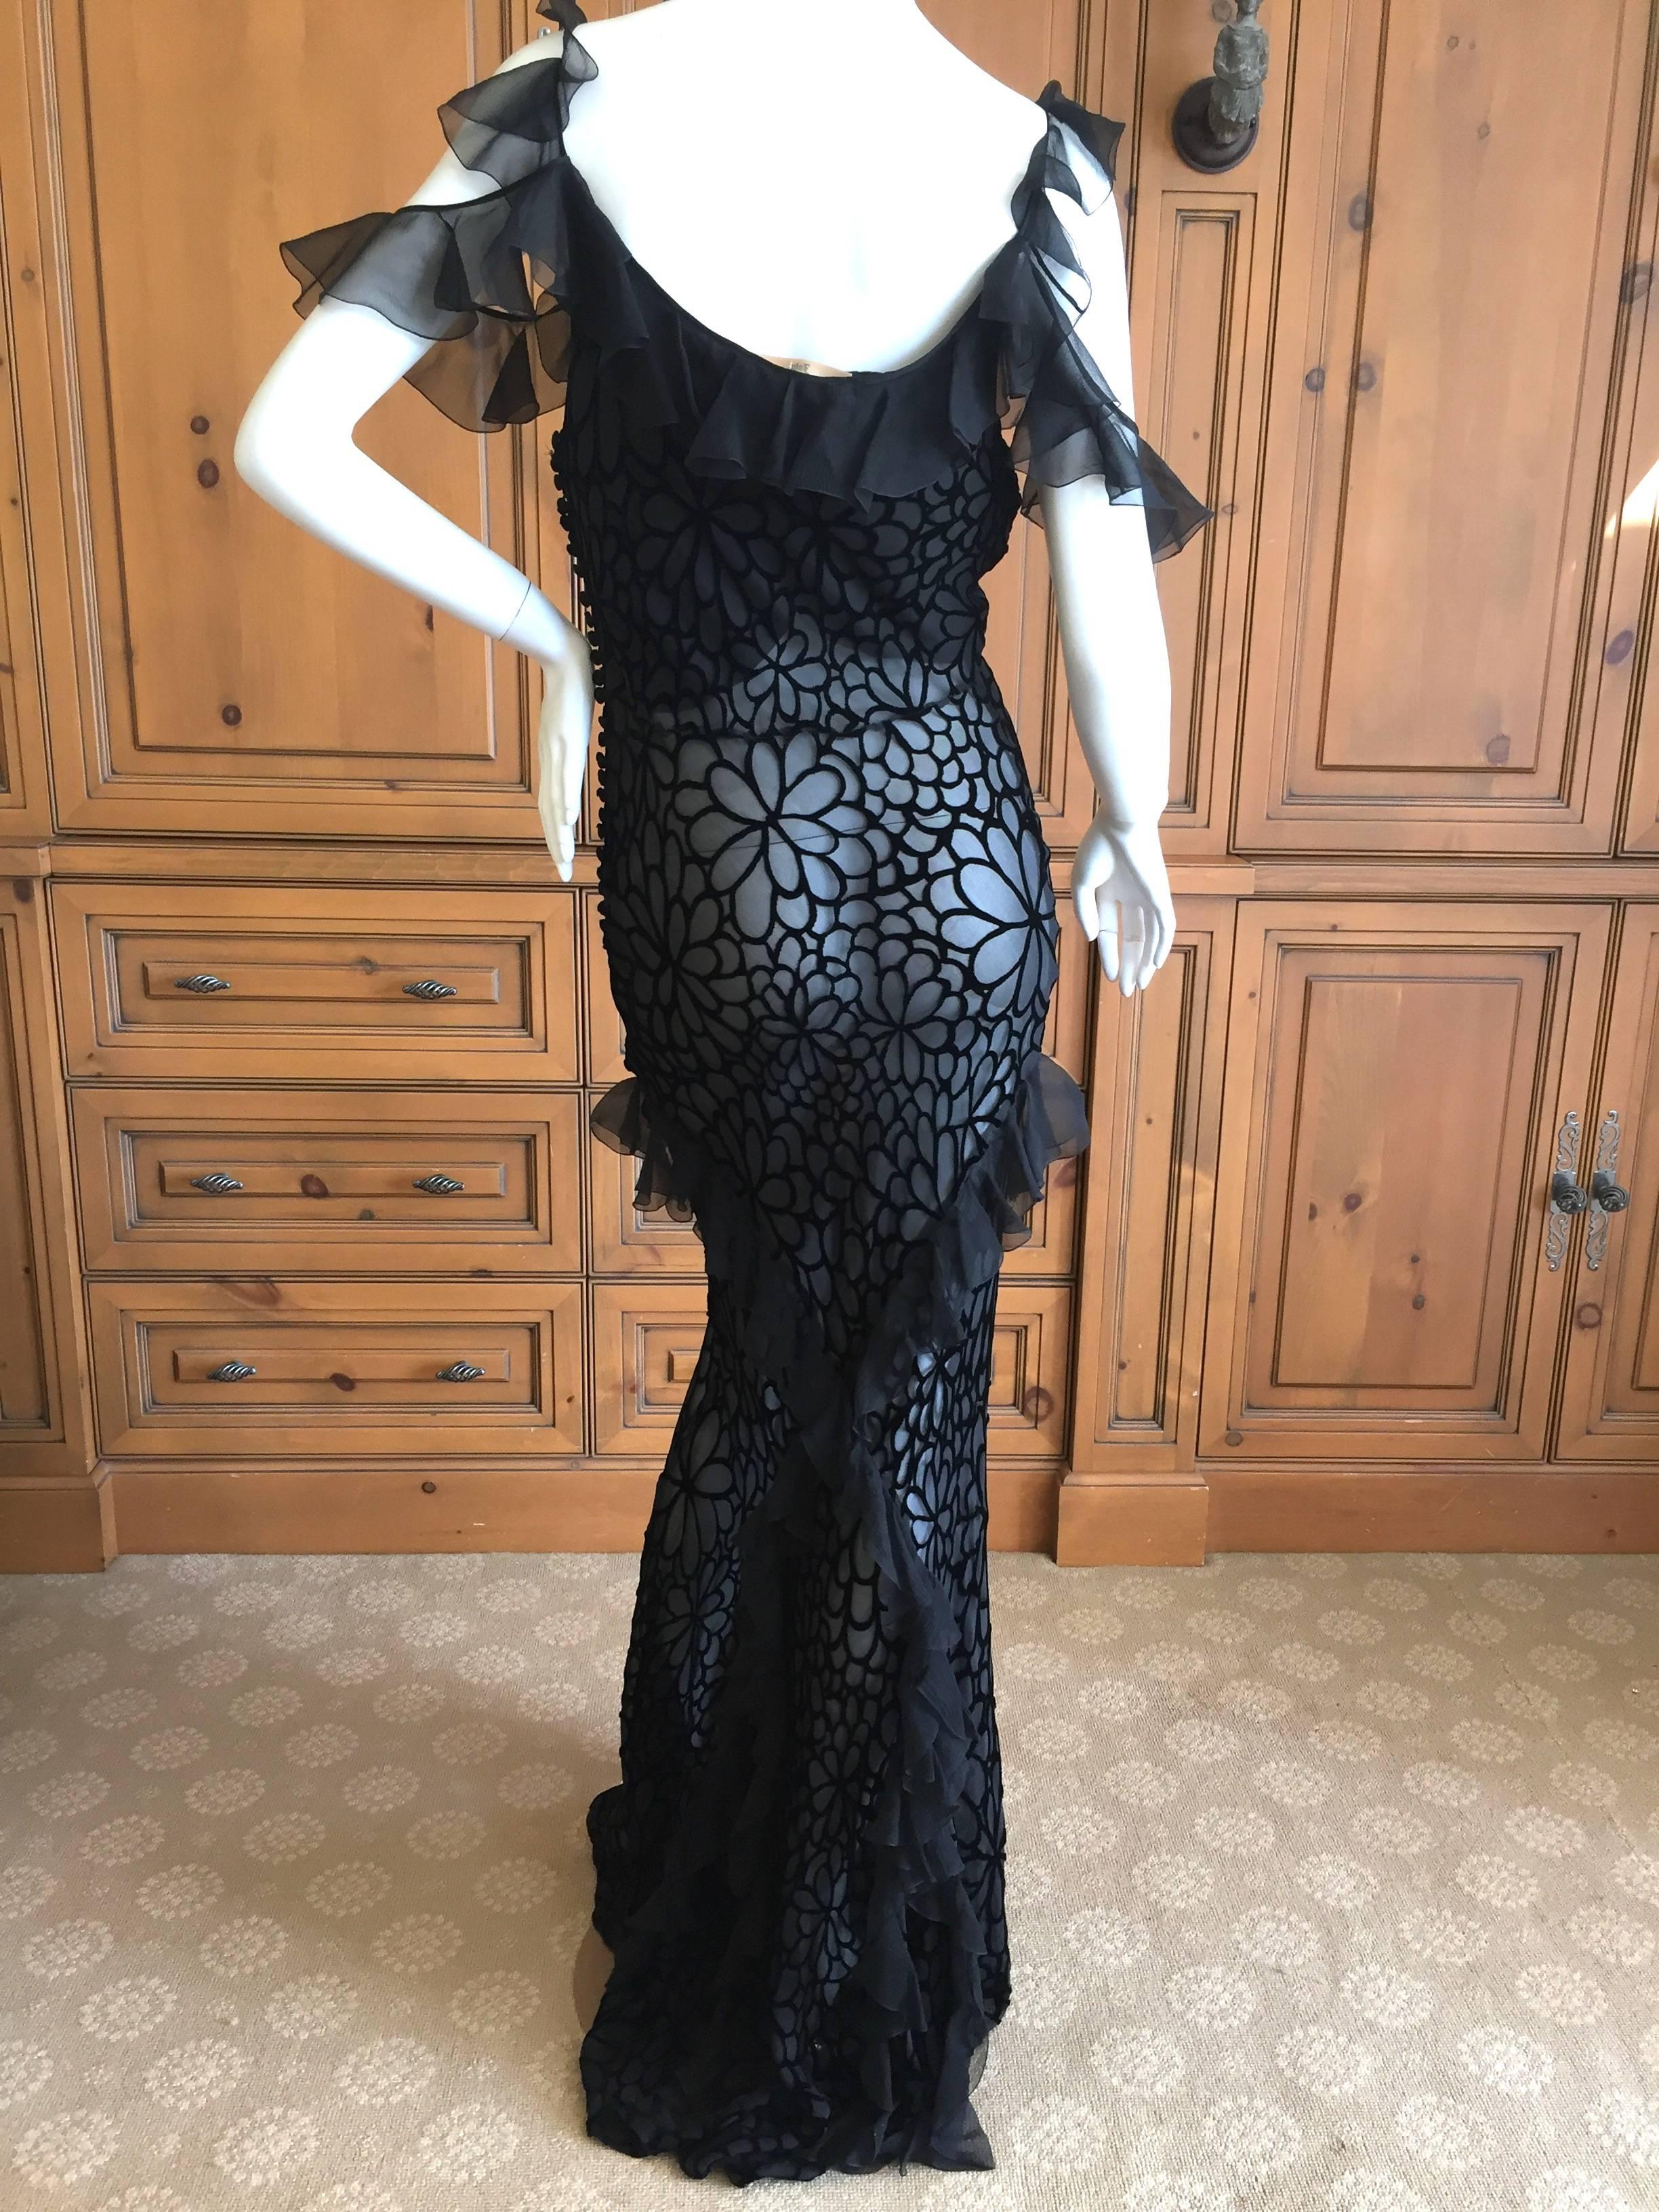 Elegant black ruffled evening gown from John Galliano.
Made of cut out devore velvet, this comes with a slip attached, but I think it would be wonderful removed.
I show it with the slip, and also where I hiked up the slip to show the wonderful